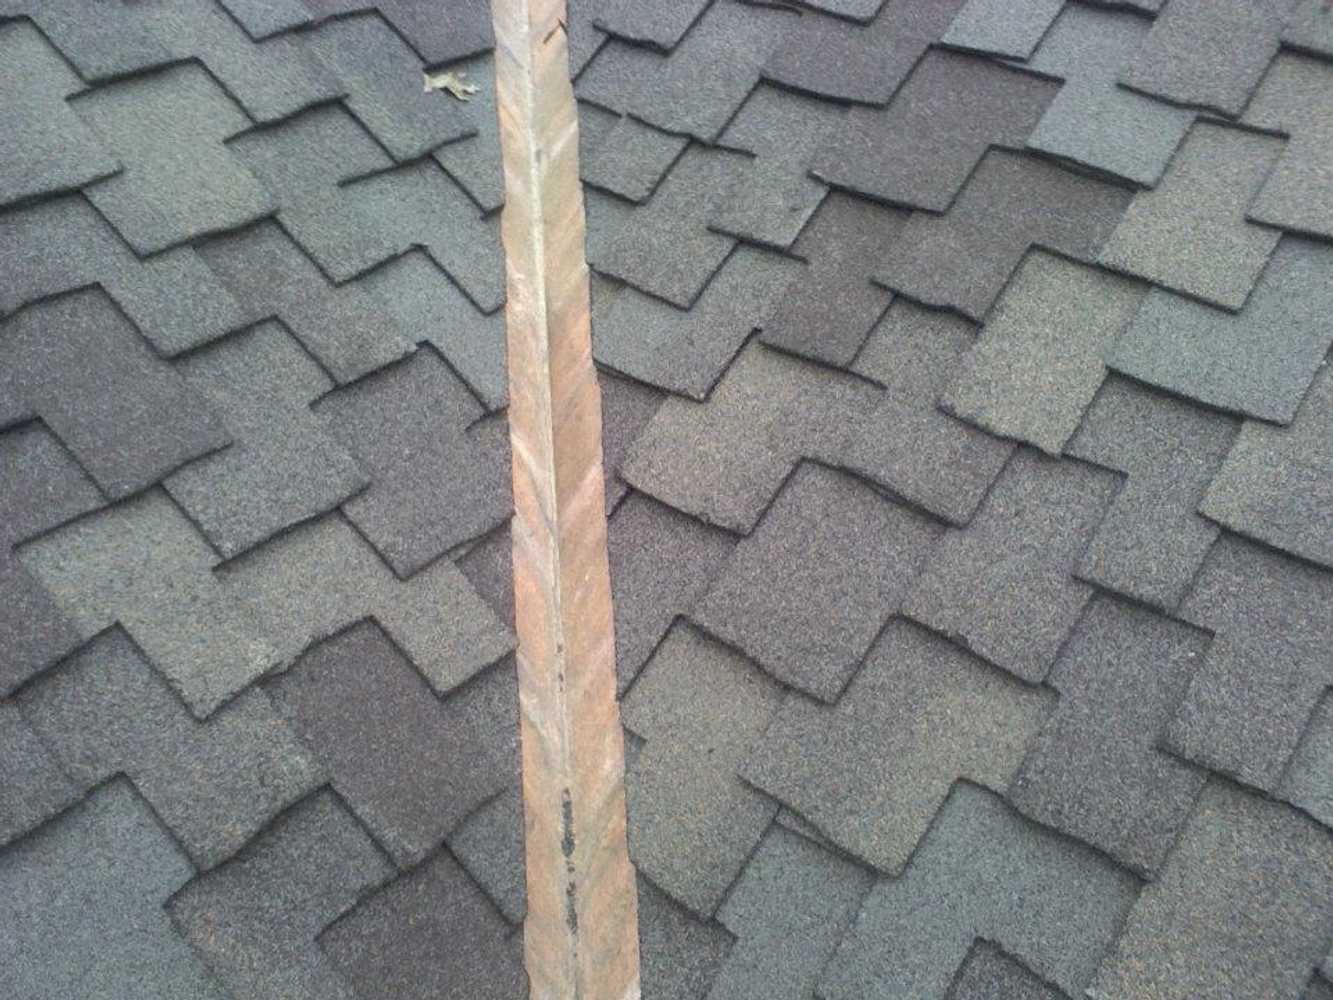 Photo(s) from Perfection Roofing